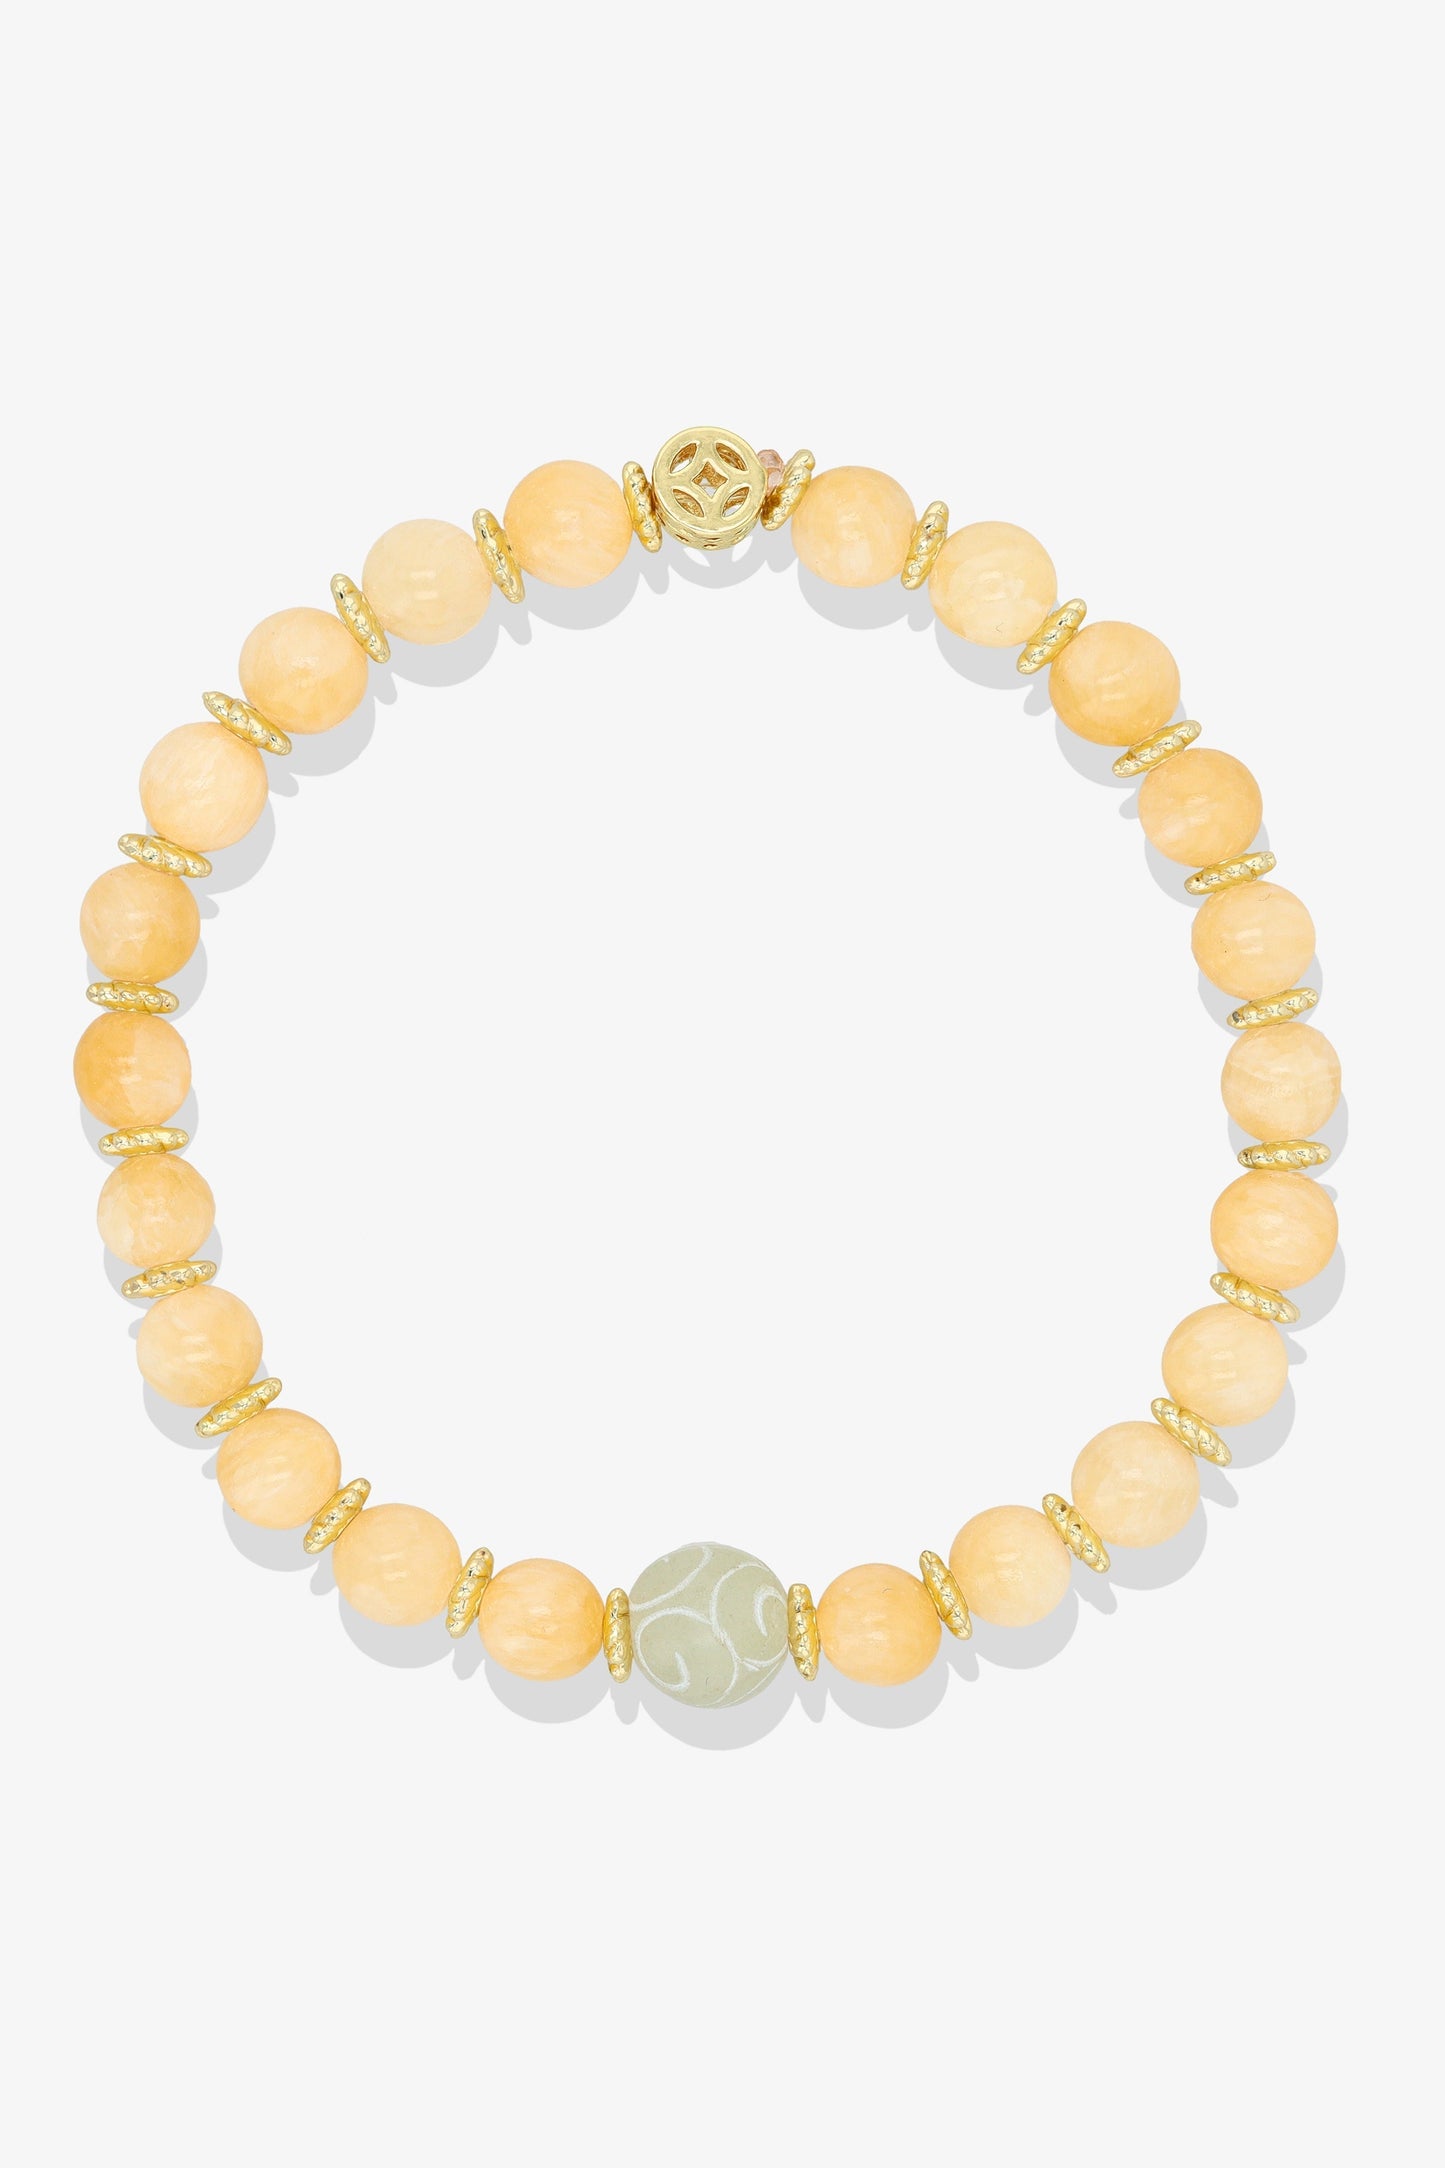 Yellow Calcite with Gold Lucky Coin and White Jade charm Bracelet